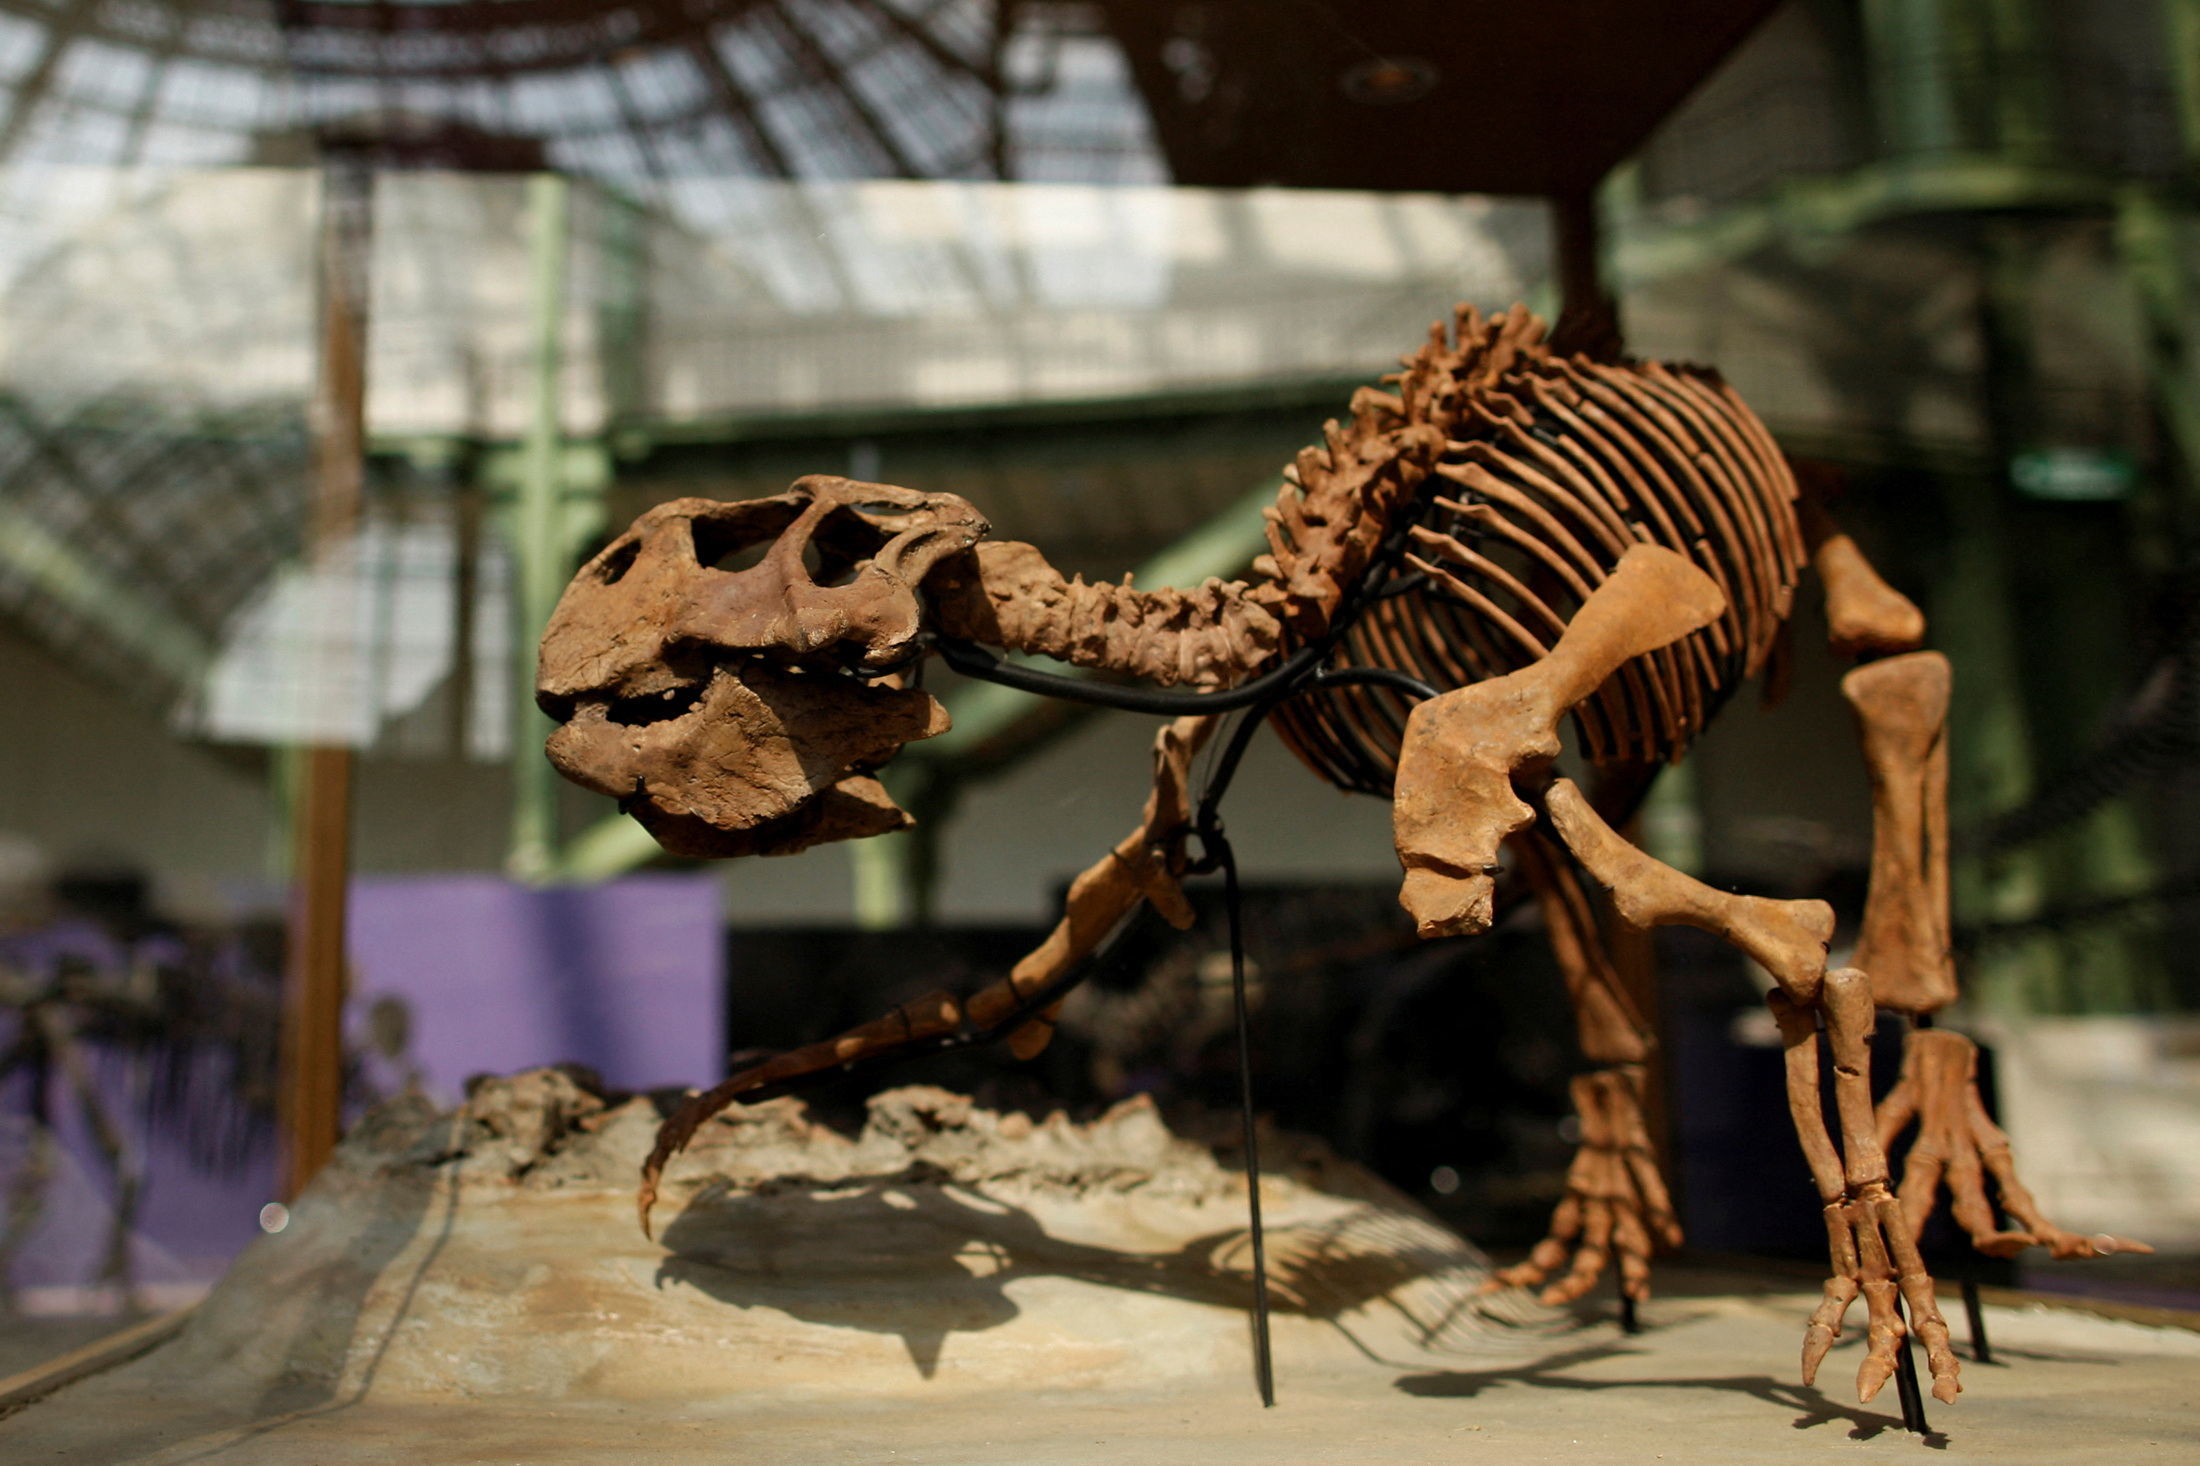 The skeleton of a Psittacosaurus dinosaur is displayed during the Collector Exhibition at the Grand Palais Museum in Paris